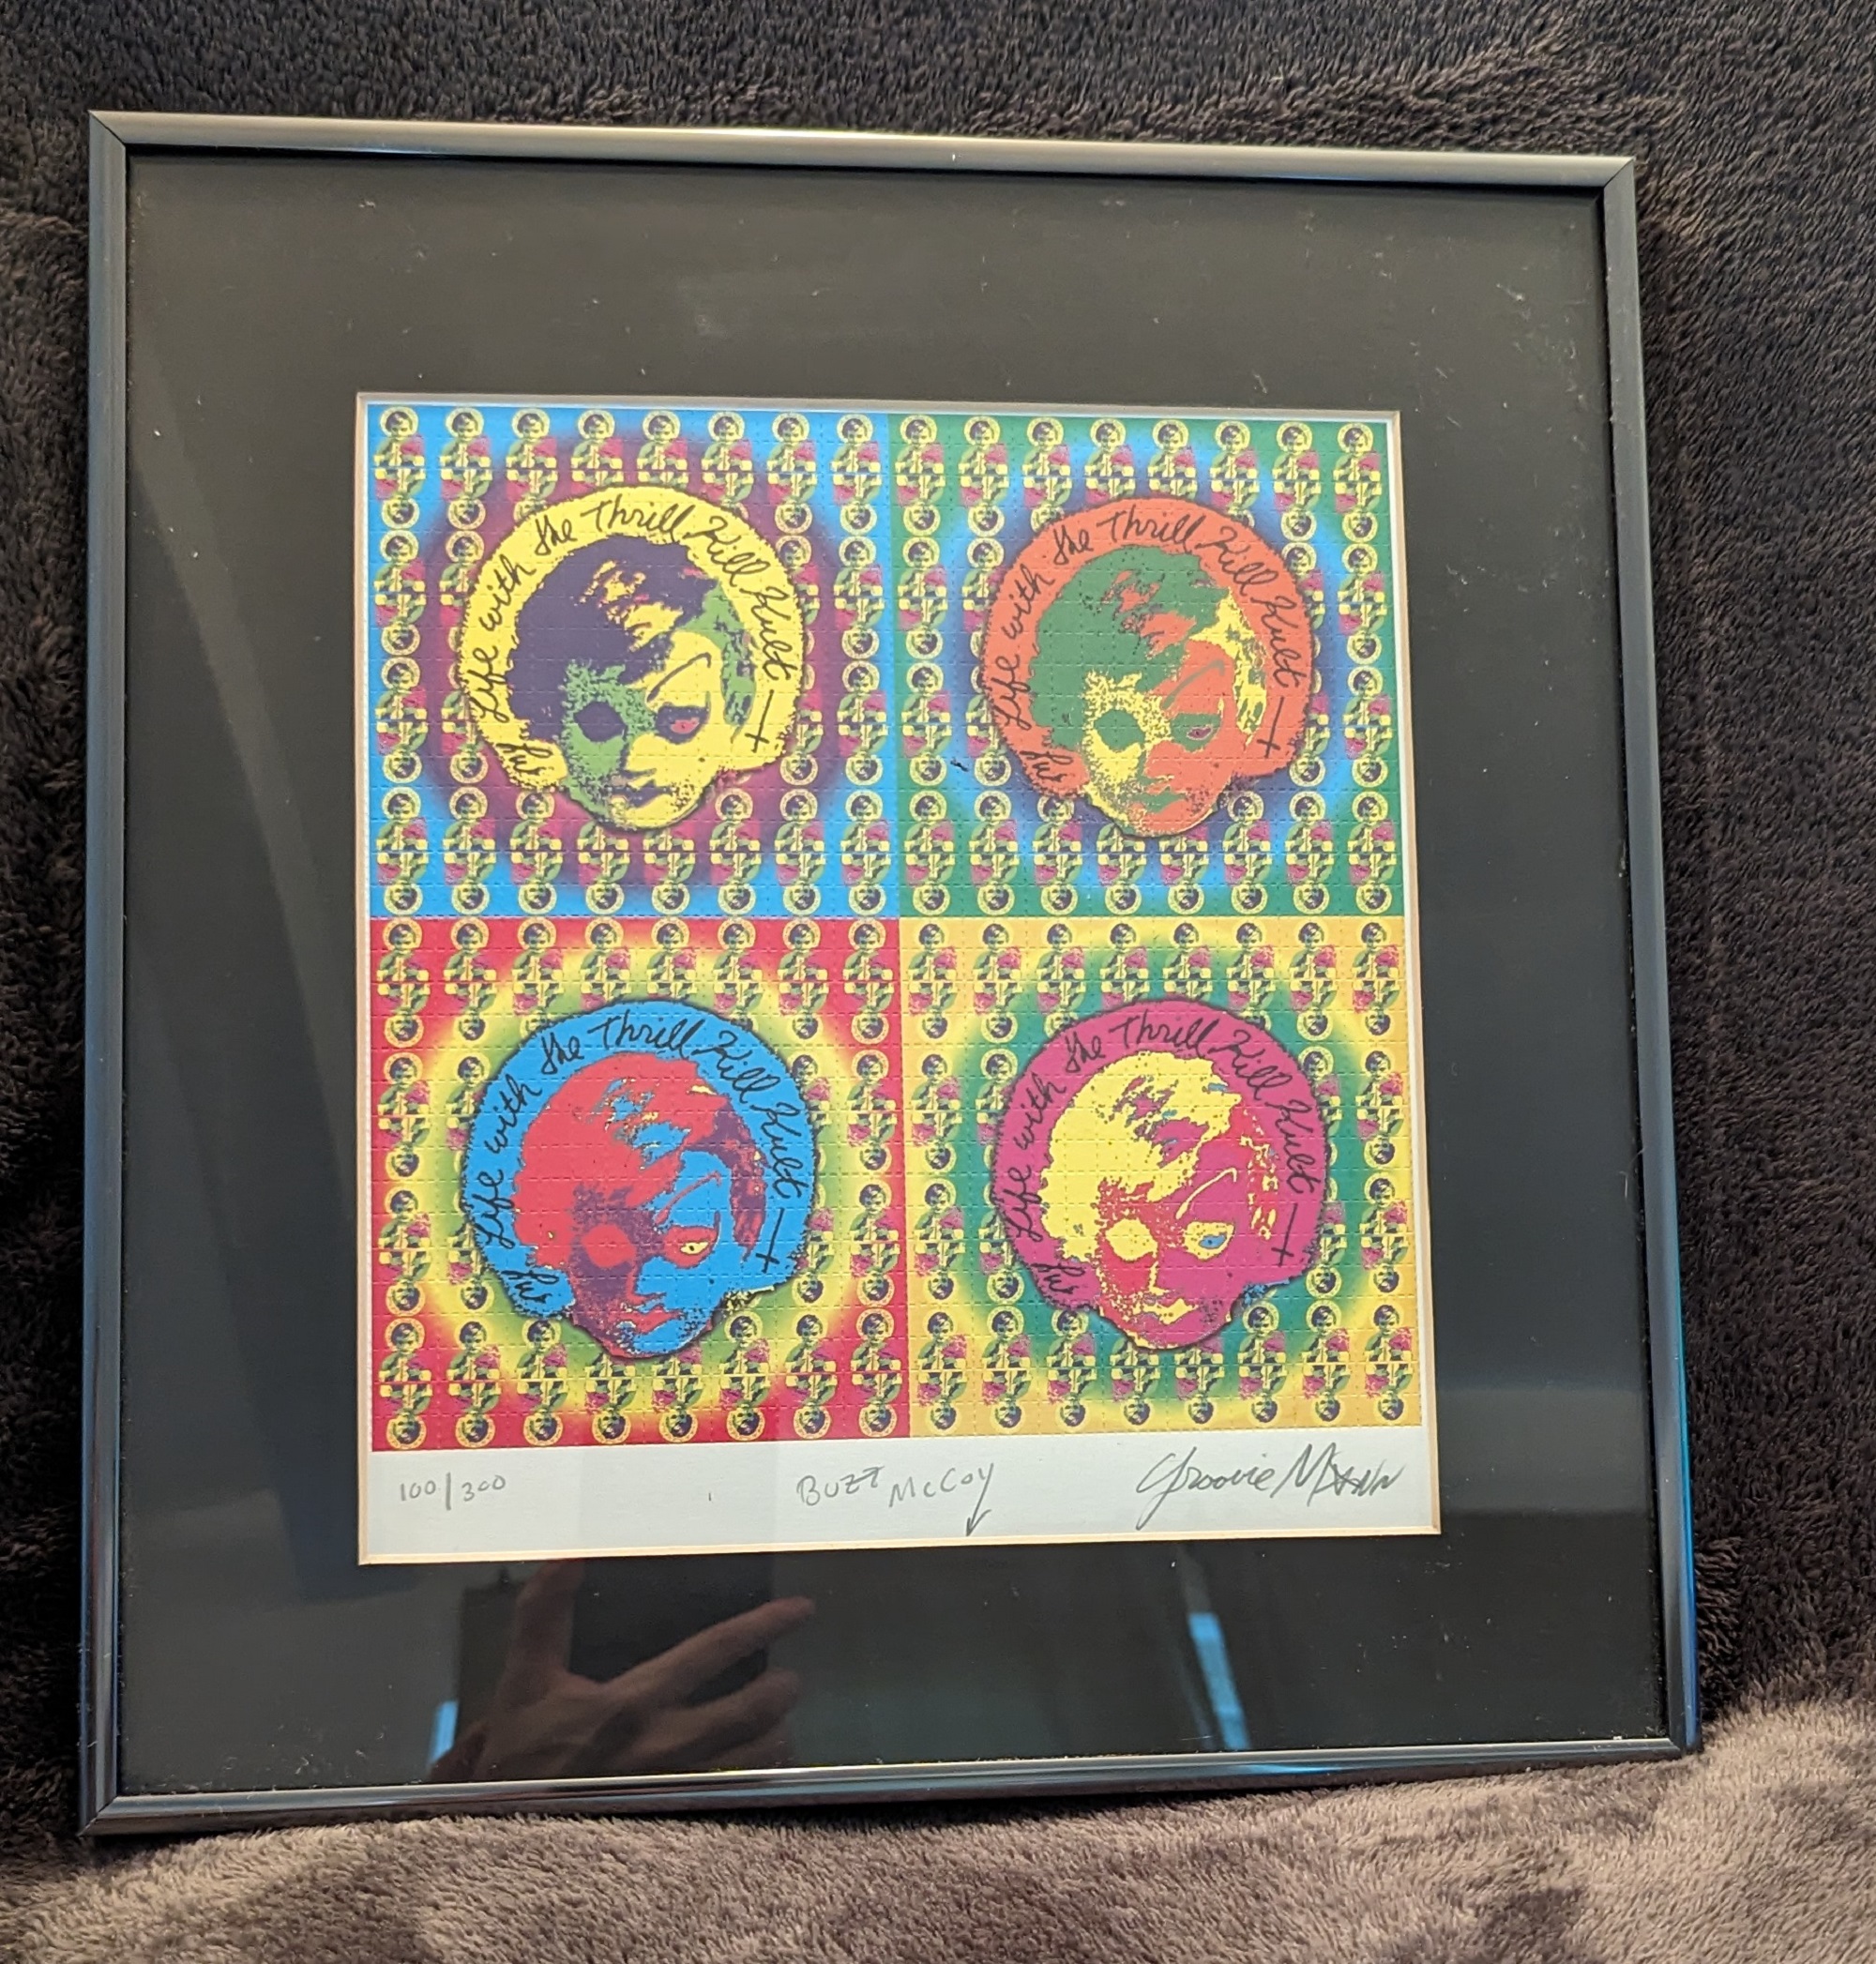 Just an example of how cool this Signed blotter art looks when it's framed.